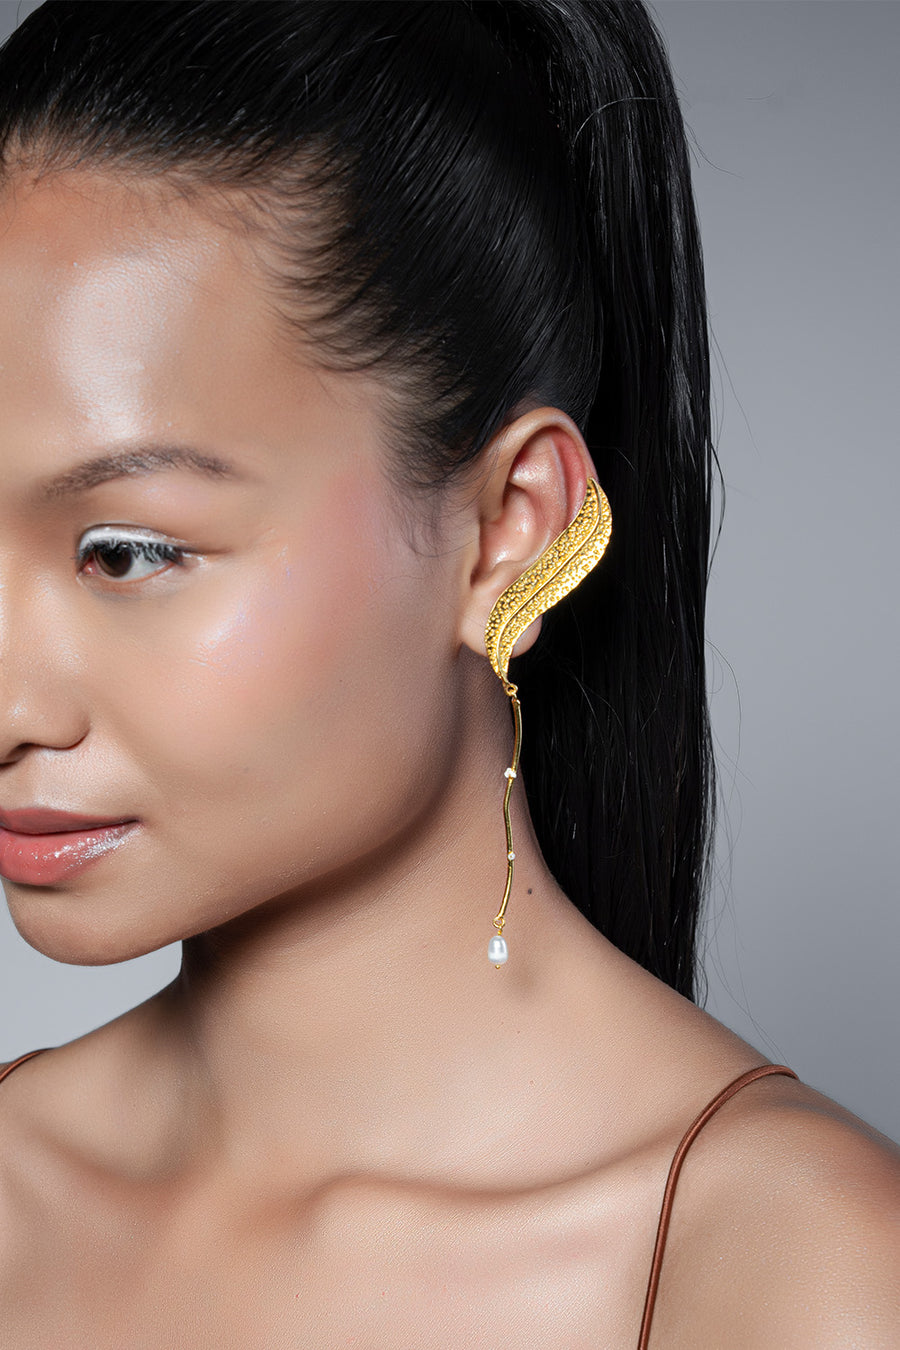 Baguette Cartilage Ear Cuff | No Piercing 14K Gold Conch Hoop – Two of Most